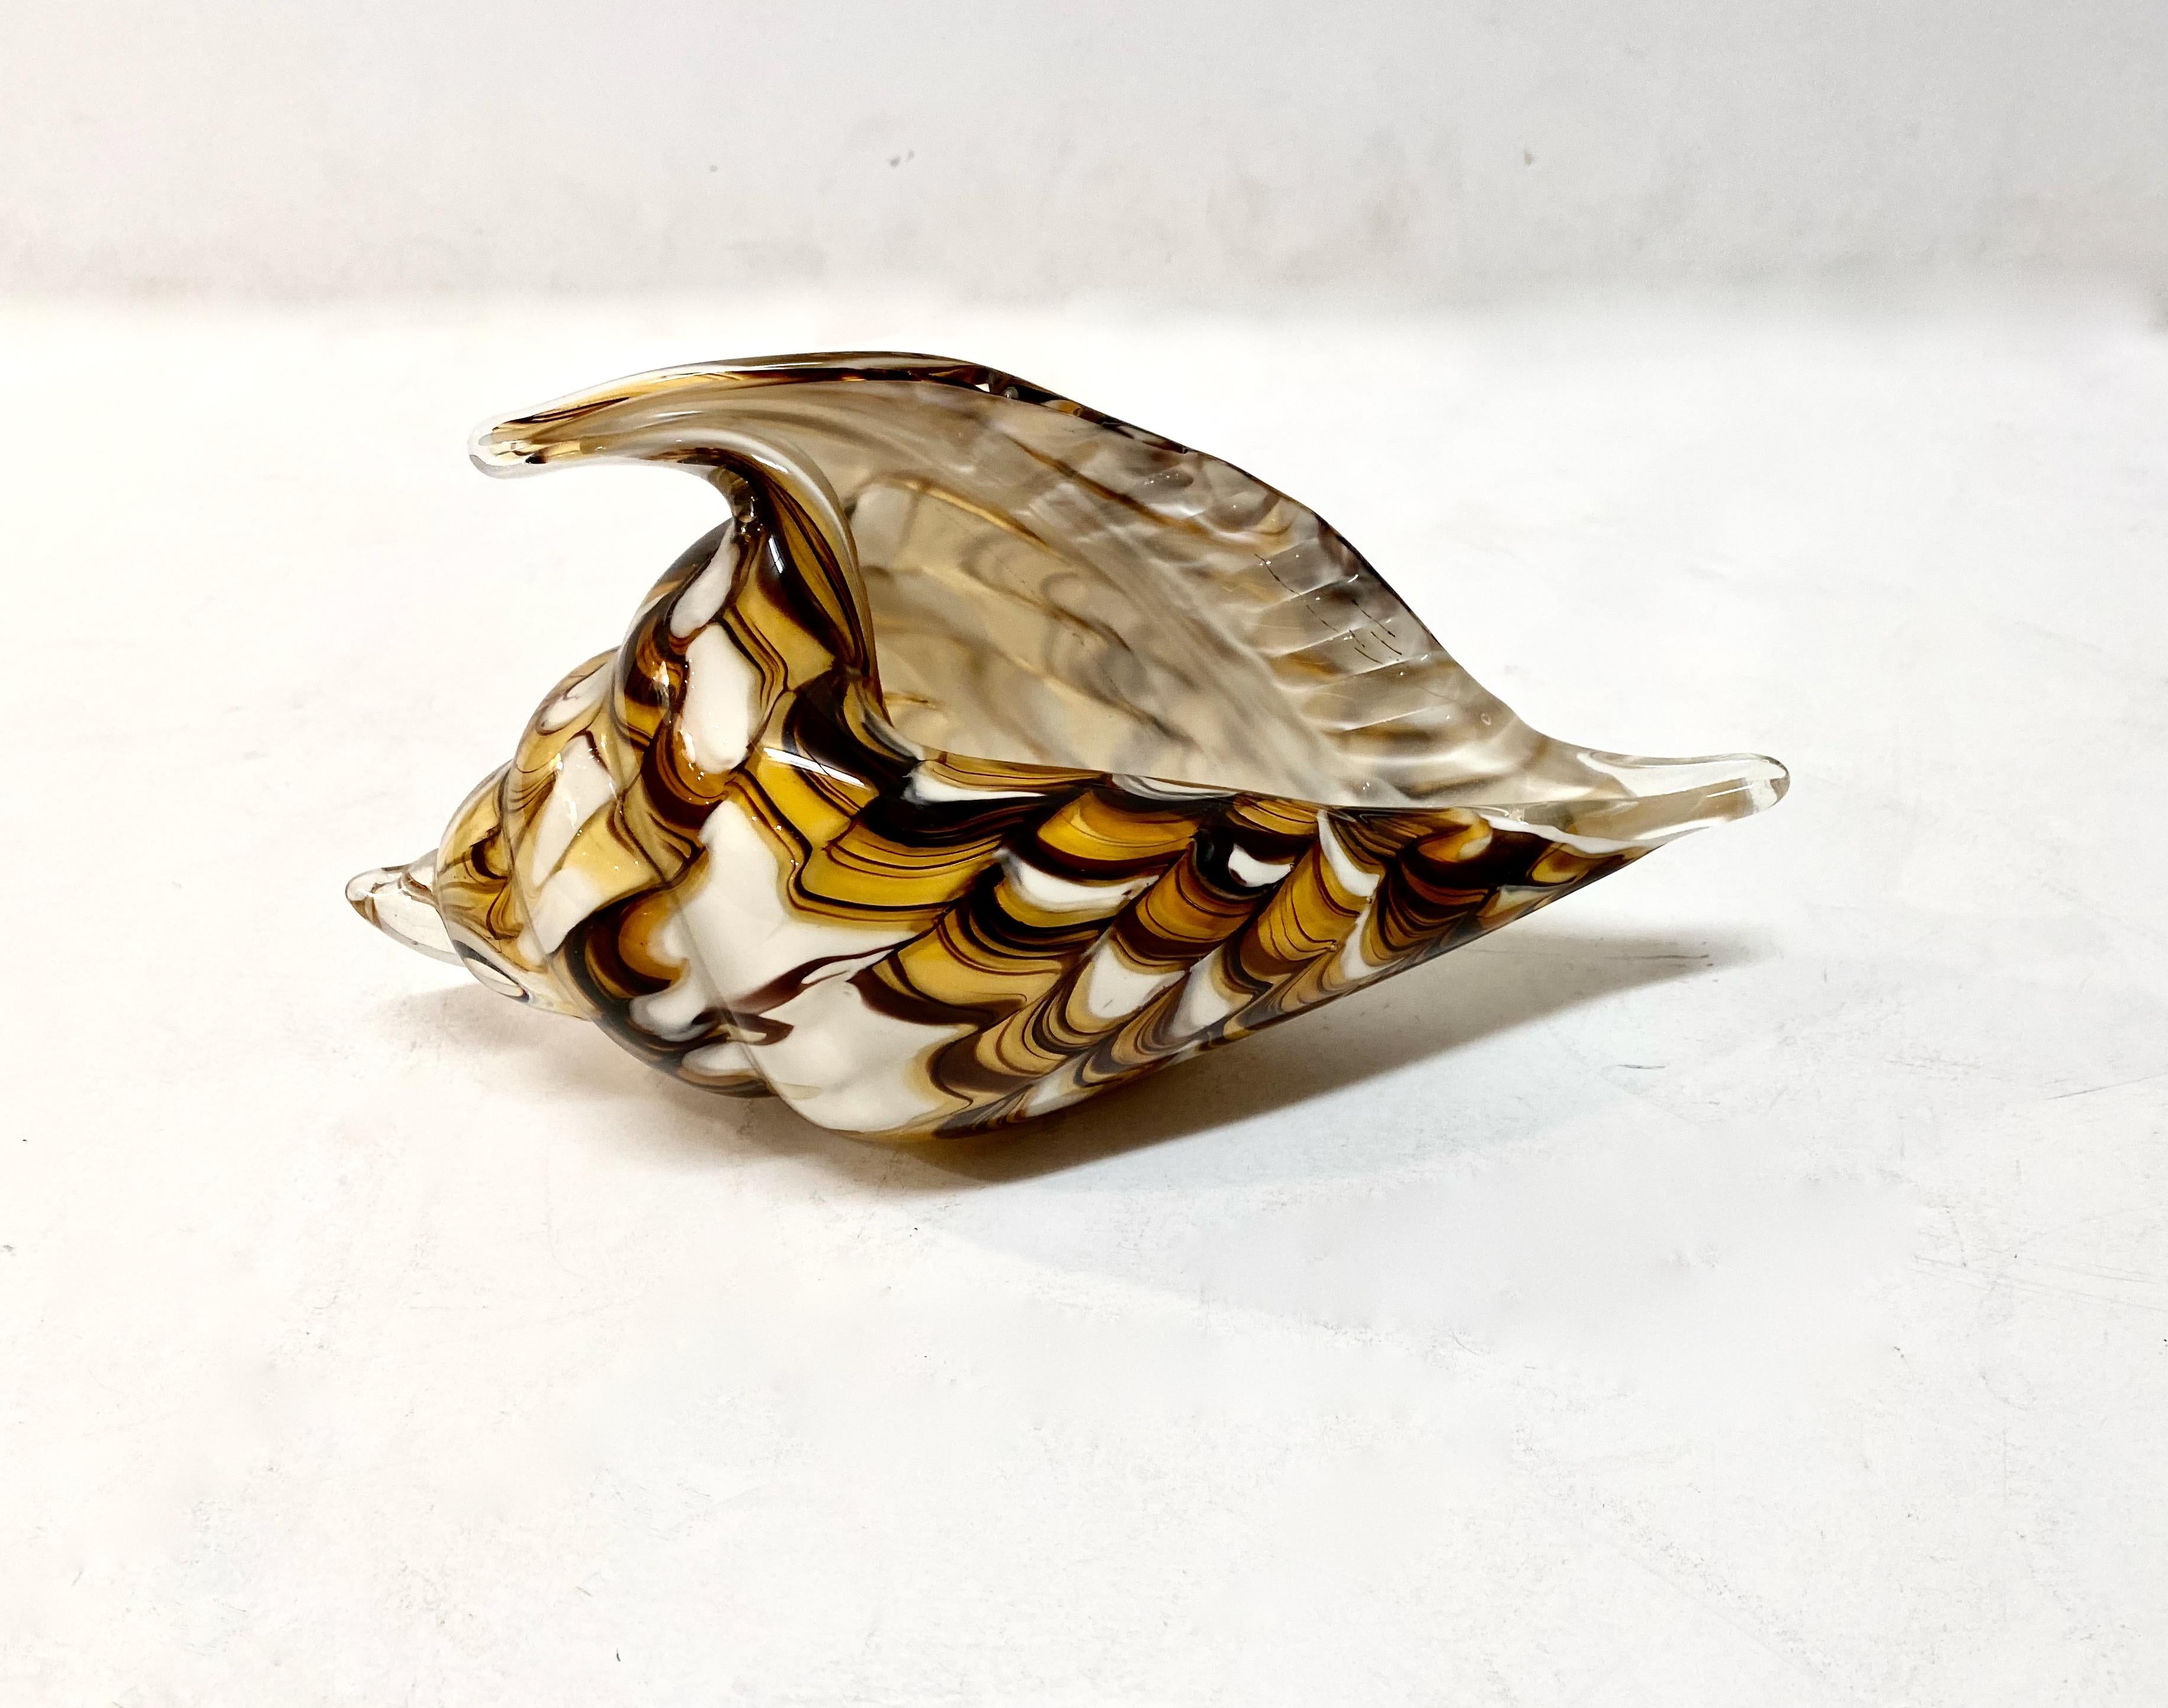 Beautiful mid-century murano shell-form sculpture or dish in rich deep chocolate brown, toffee and ivory with a clear casing. The impressive size of the shell combined with the multicolor design makes this a stand-out accent piece for table top or